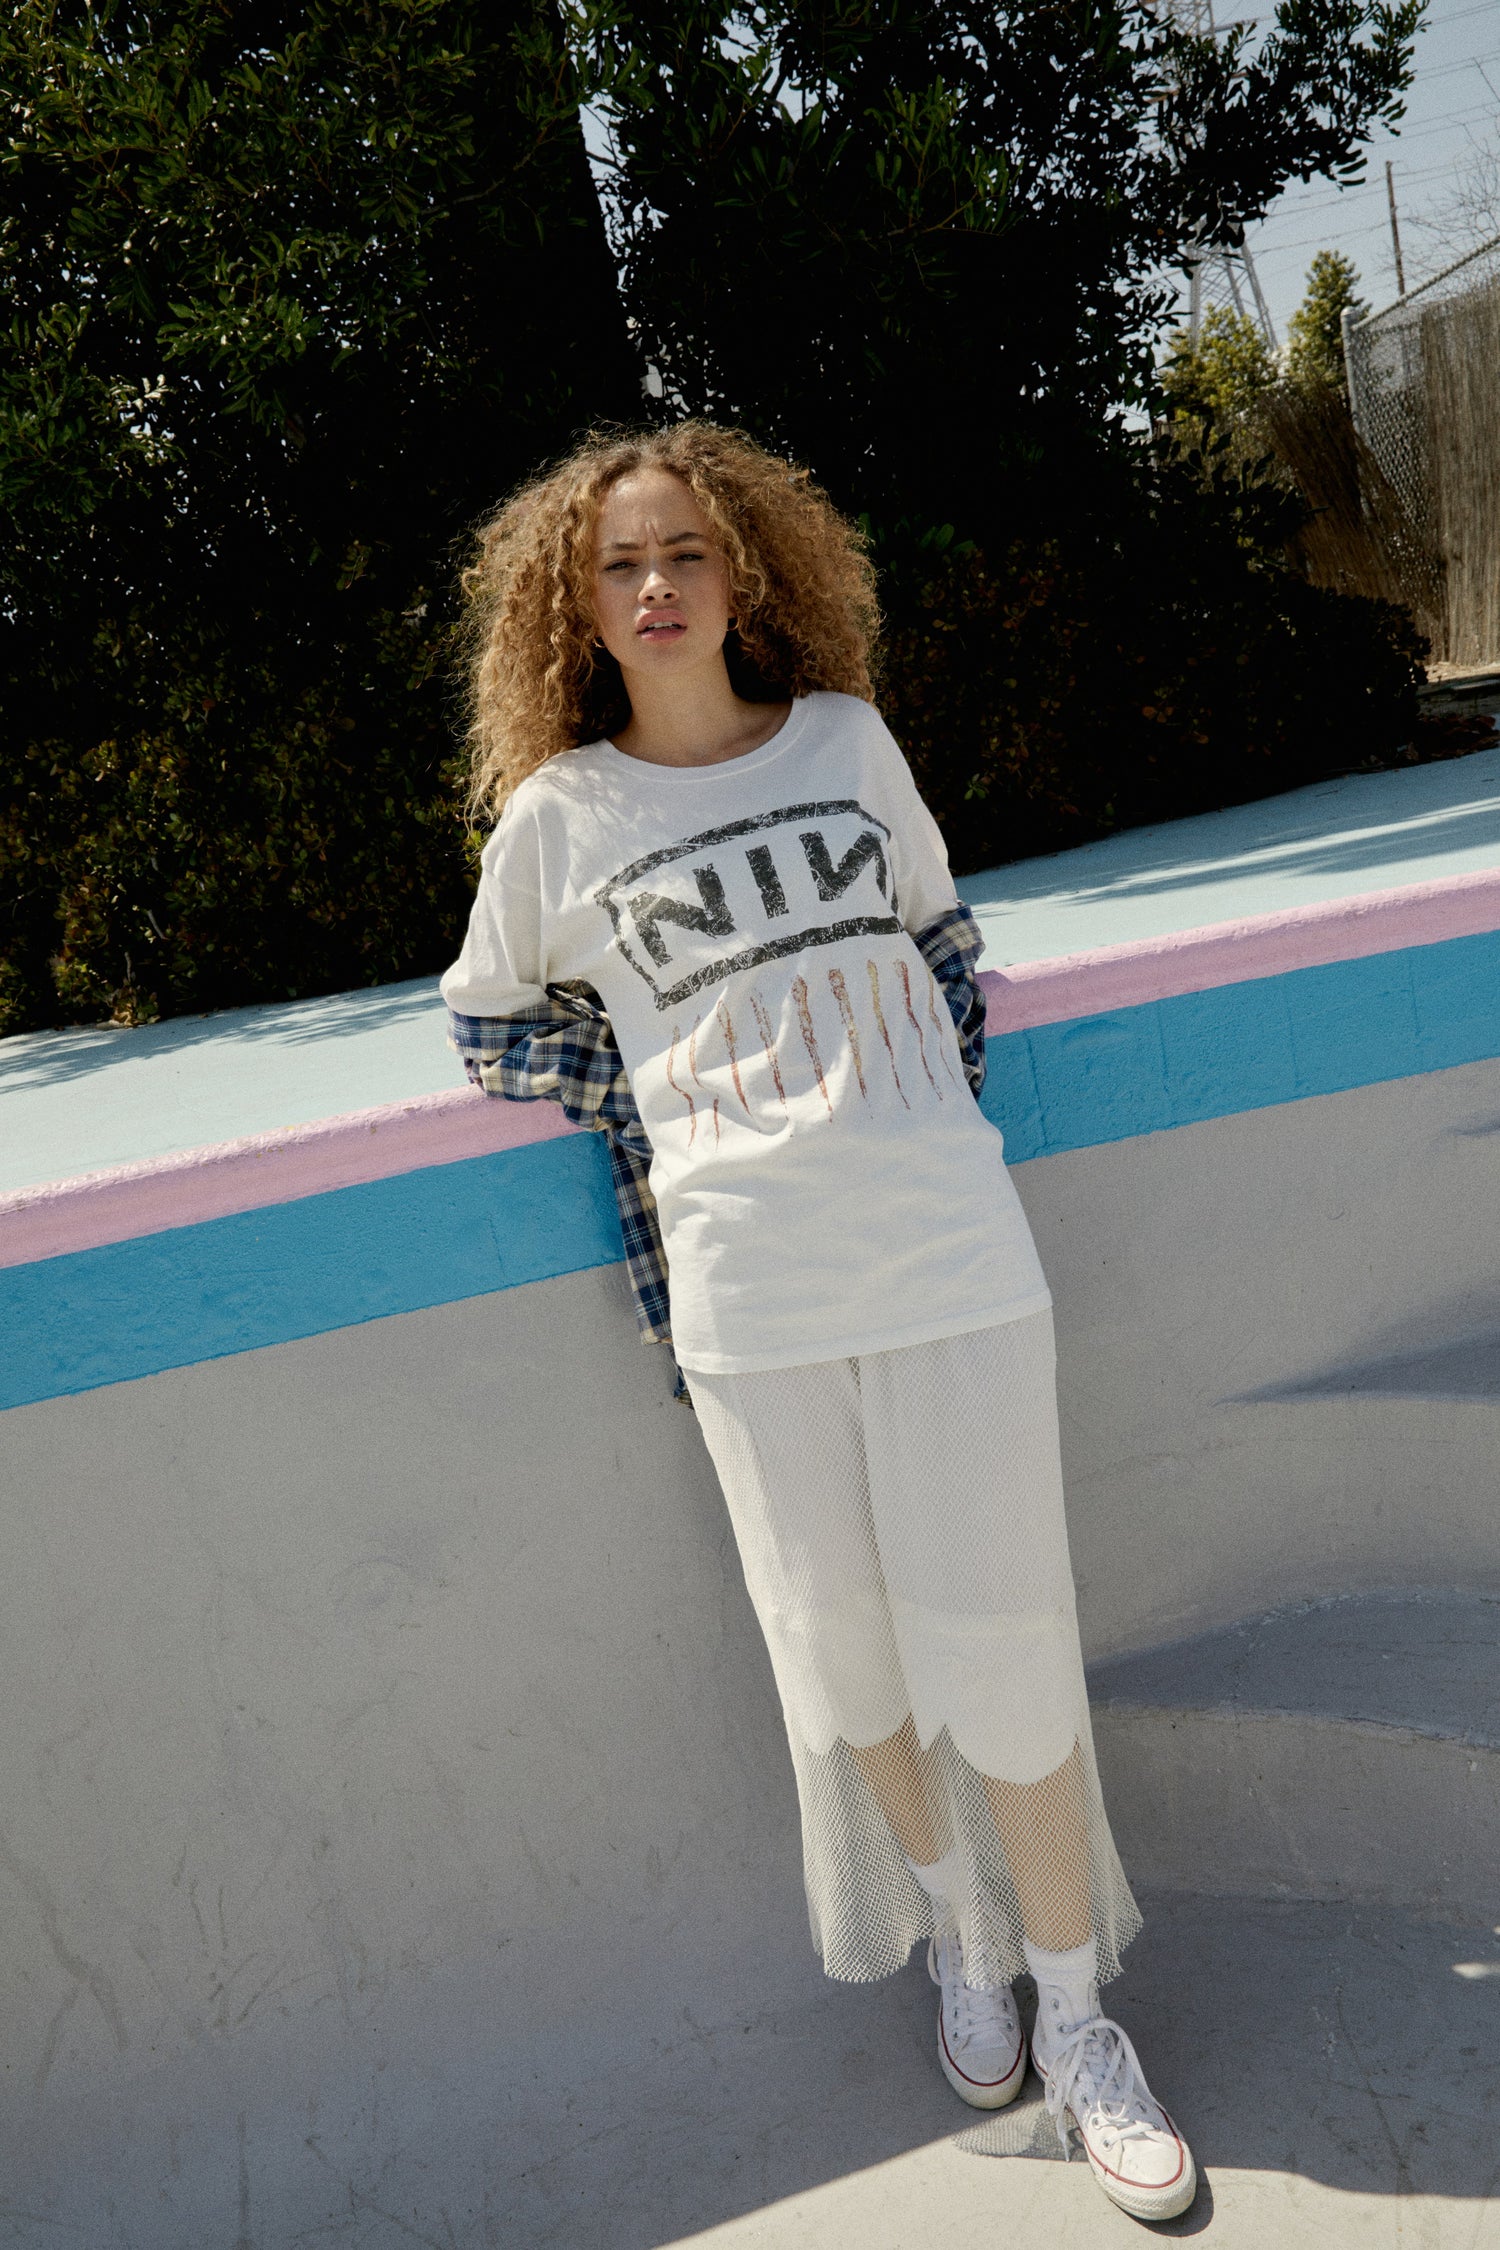 A brown curly-haired model featuring a white tee designed with their logo lands on this roomy merch tee with a tribute to one of the most important albums of the 90s,